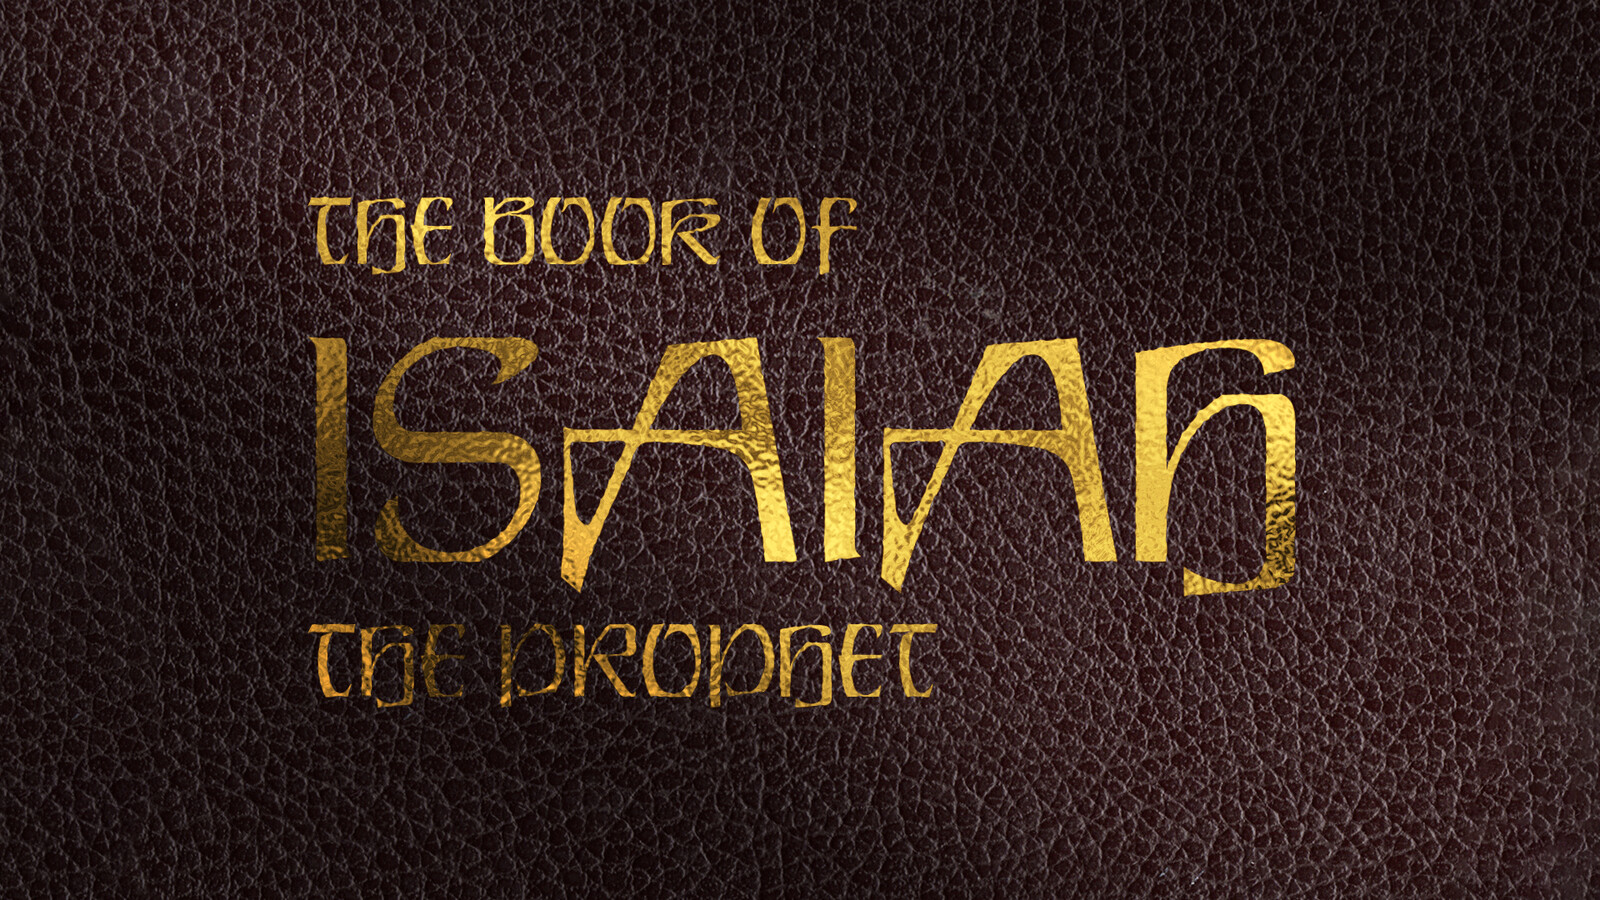 A book cover about the book Isaiah.